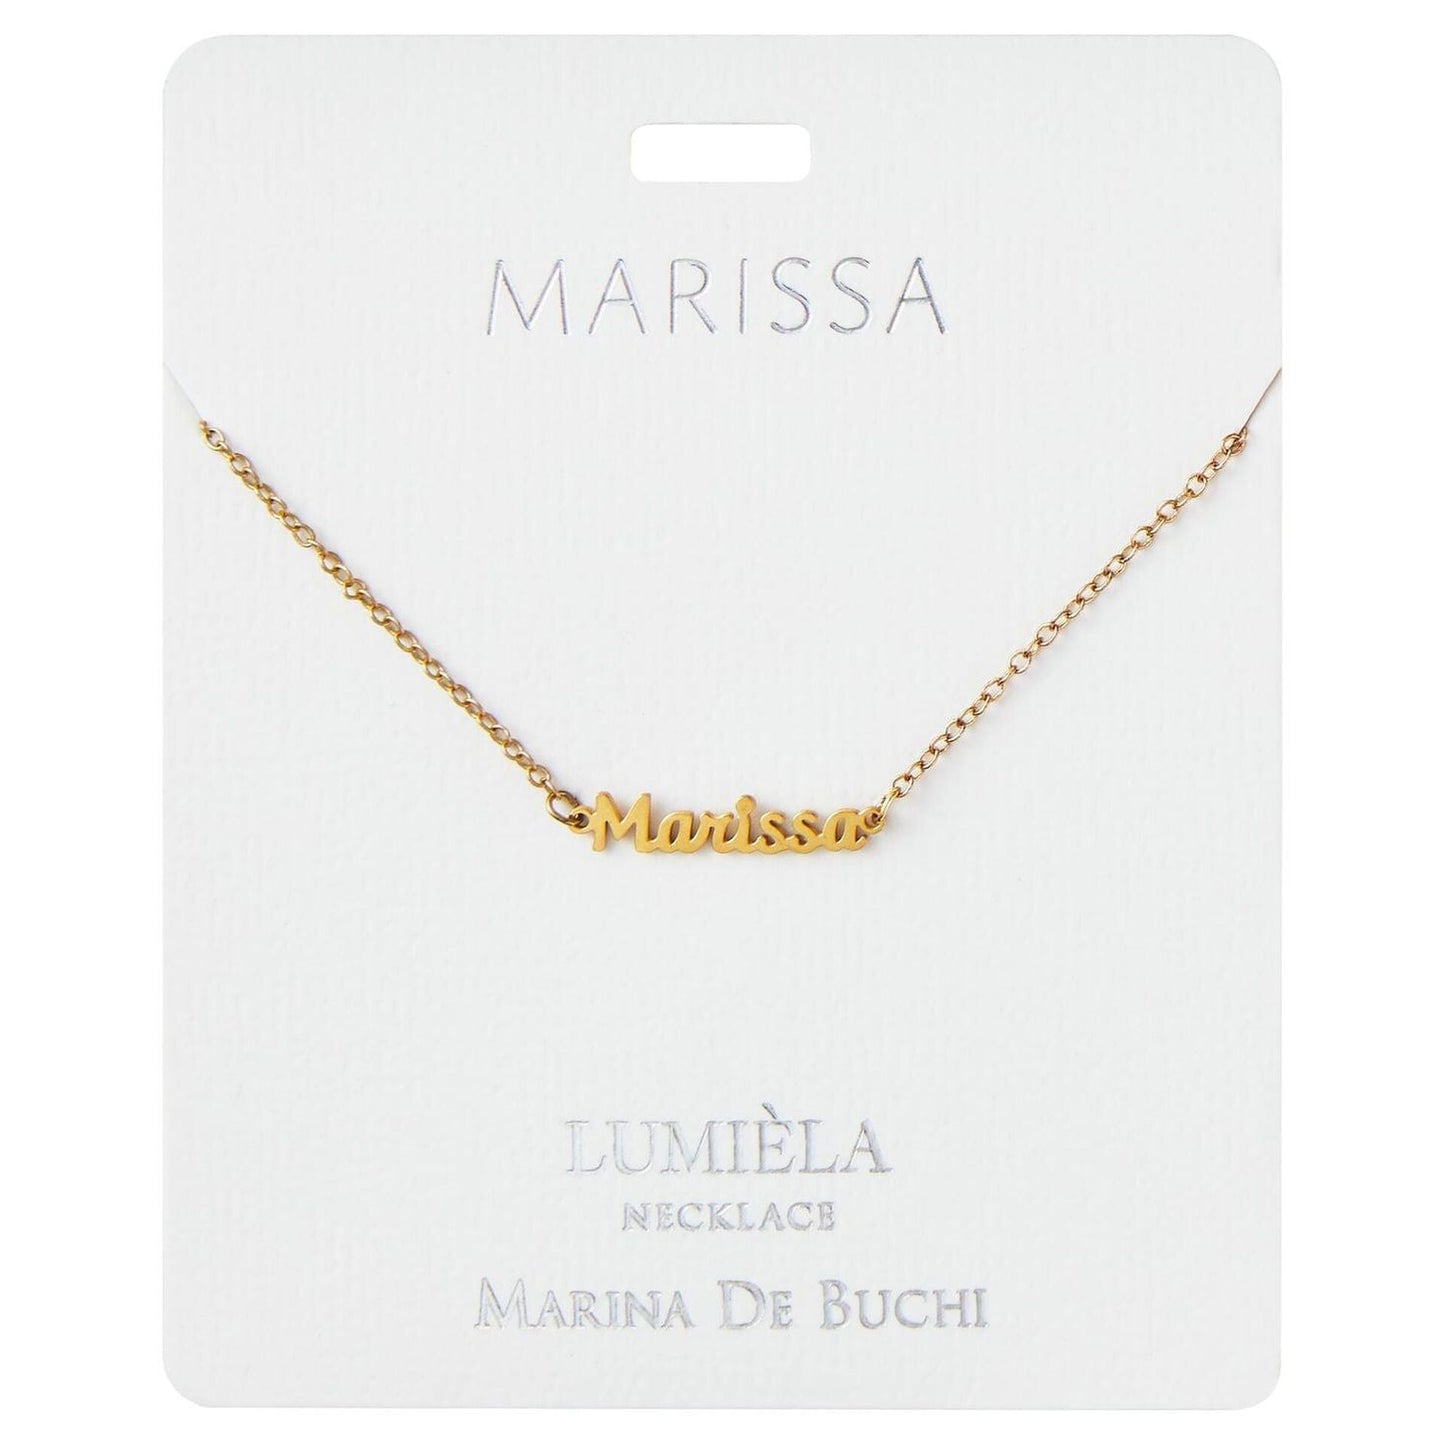 Lumiela Personalized Nameplate Emily Necklace in Gold Tone